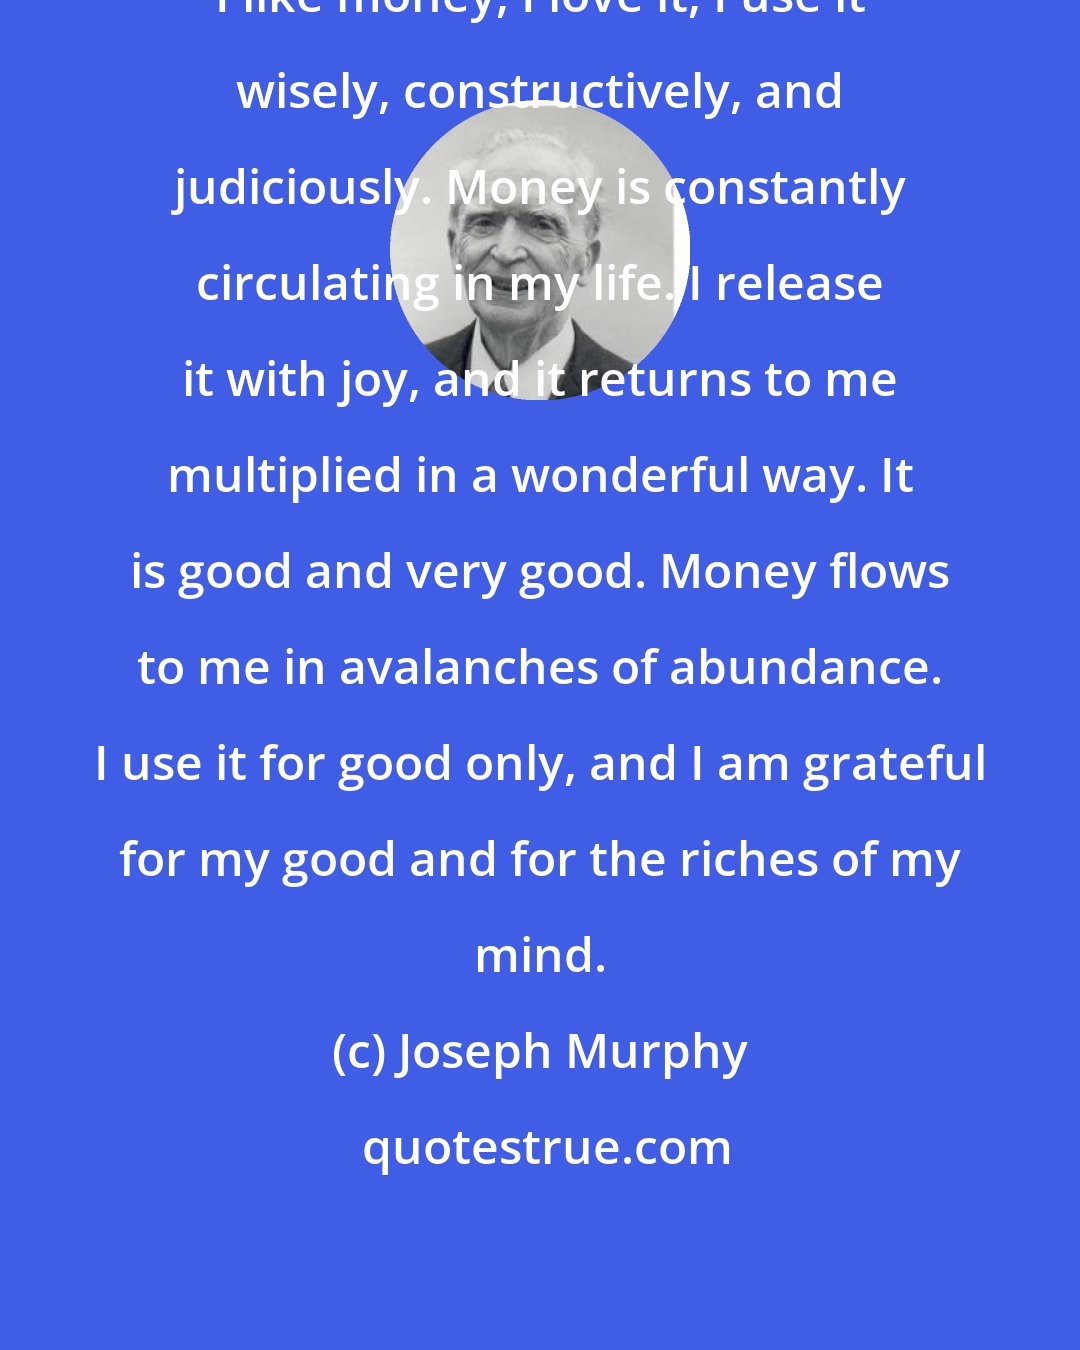 Joseph Murphy: I like money, I love it, I use it wisely, constructively, and judiciously. Money is constantly circulating in my life. I release it with joy, and it returns to me multiplied in a wonderful way. It is good and very good. Money flows to me in avalanches of abundance. I use it for good only, and I am grateful for my good and for the riches of my mind.